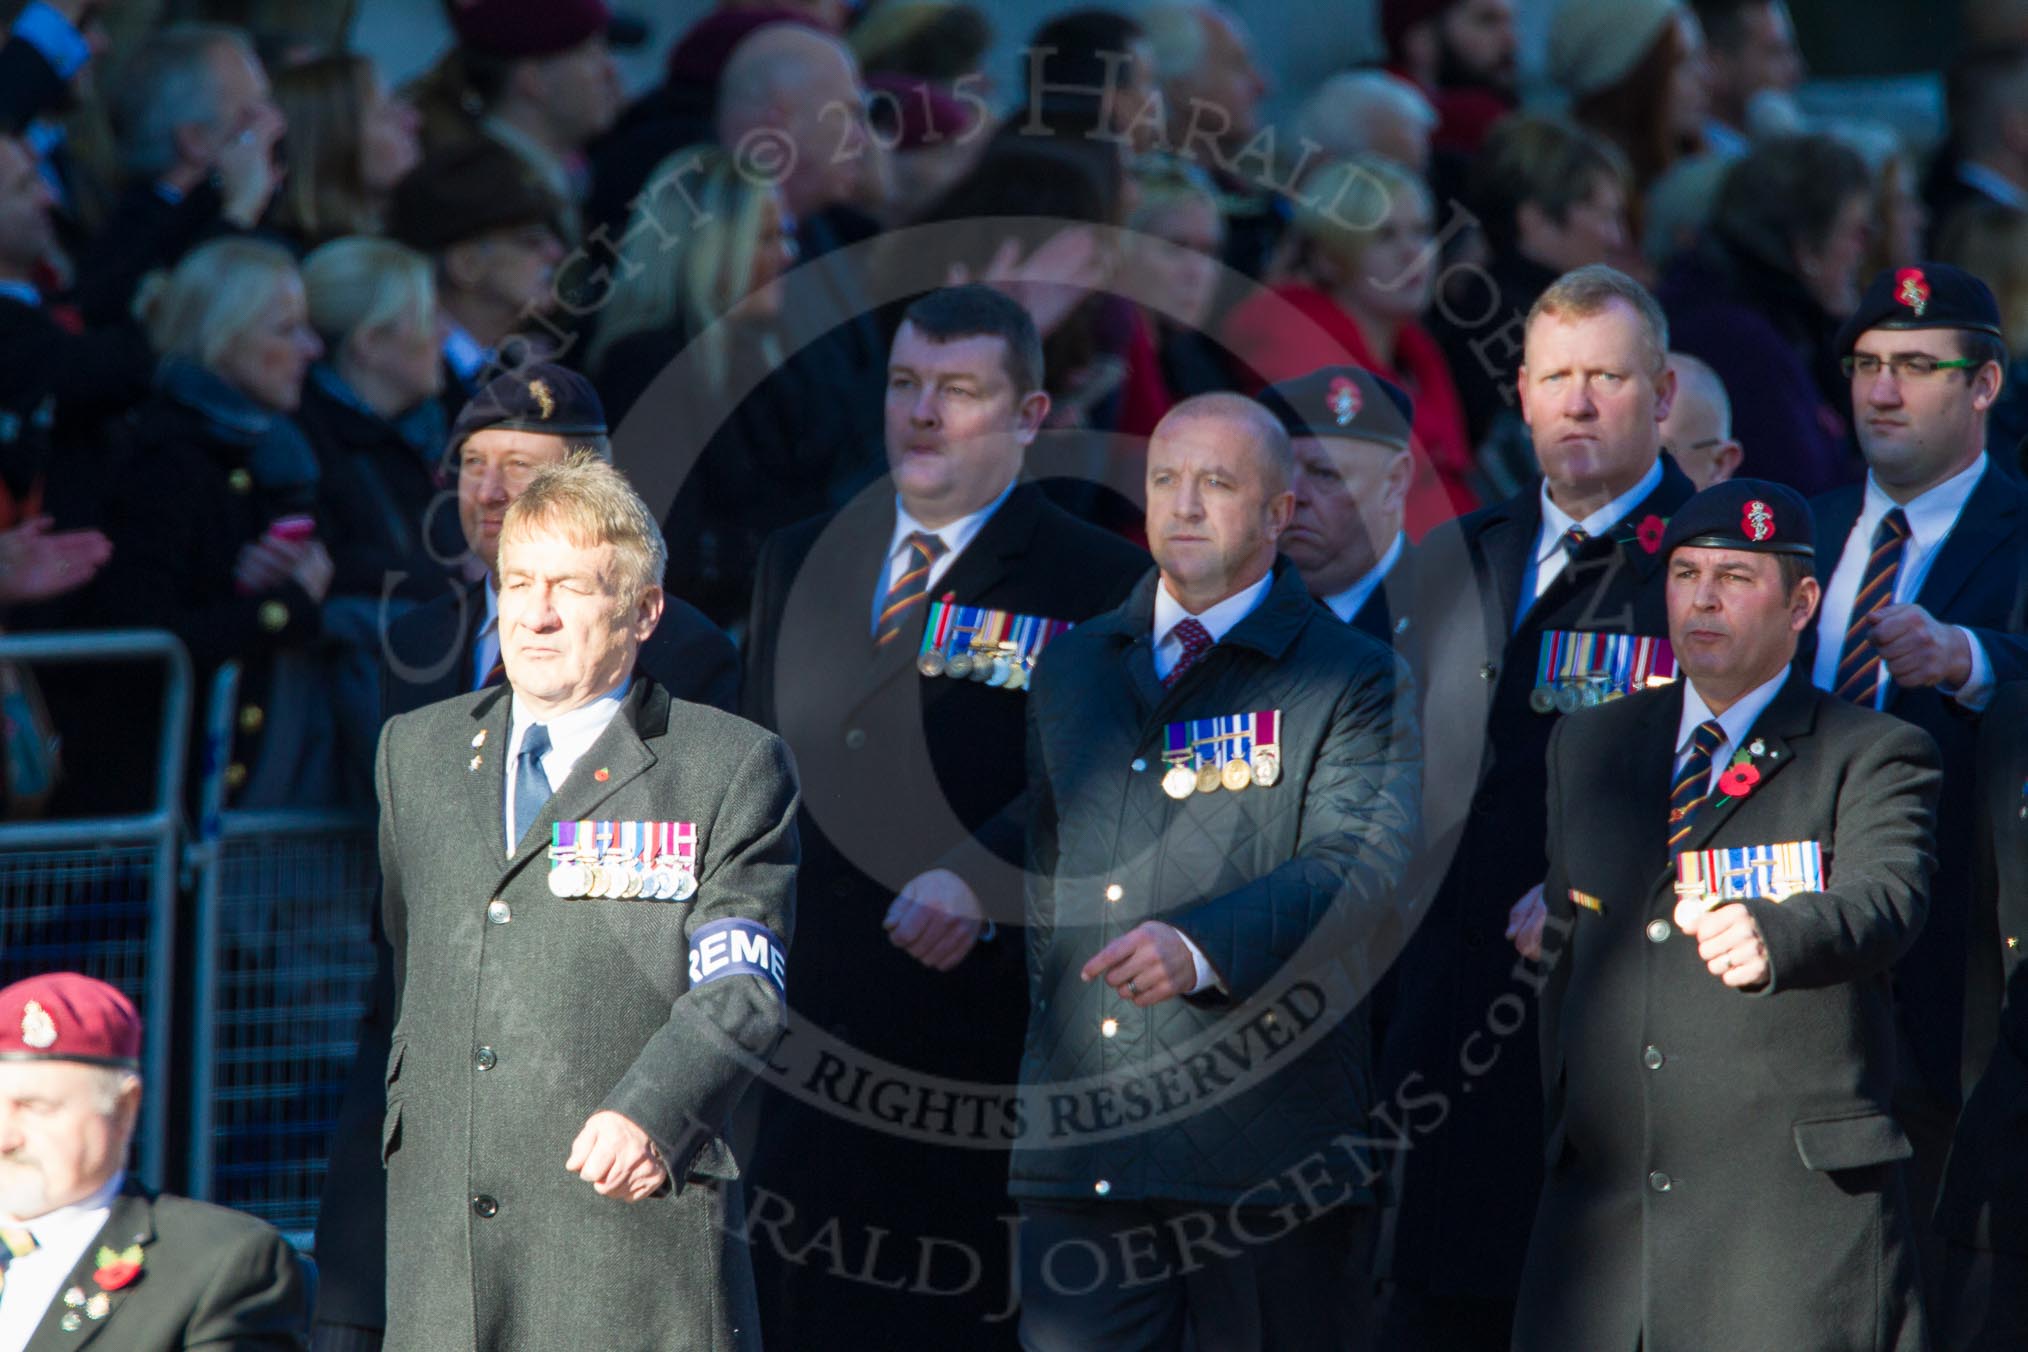 Remembrance Sunday Cenotaph March Past 2013: B32 - Royal Electrical & Mechanical Engineers Association..
Press stand opposite the Foreign Office building, Whitehall, London SW1,
London,
Greater London,
United Kingdom,
on 10 November 2013 at 12:03, image #1577